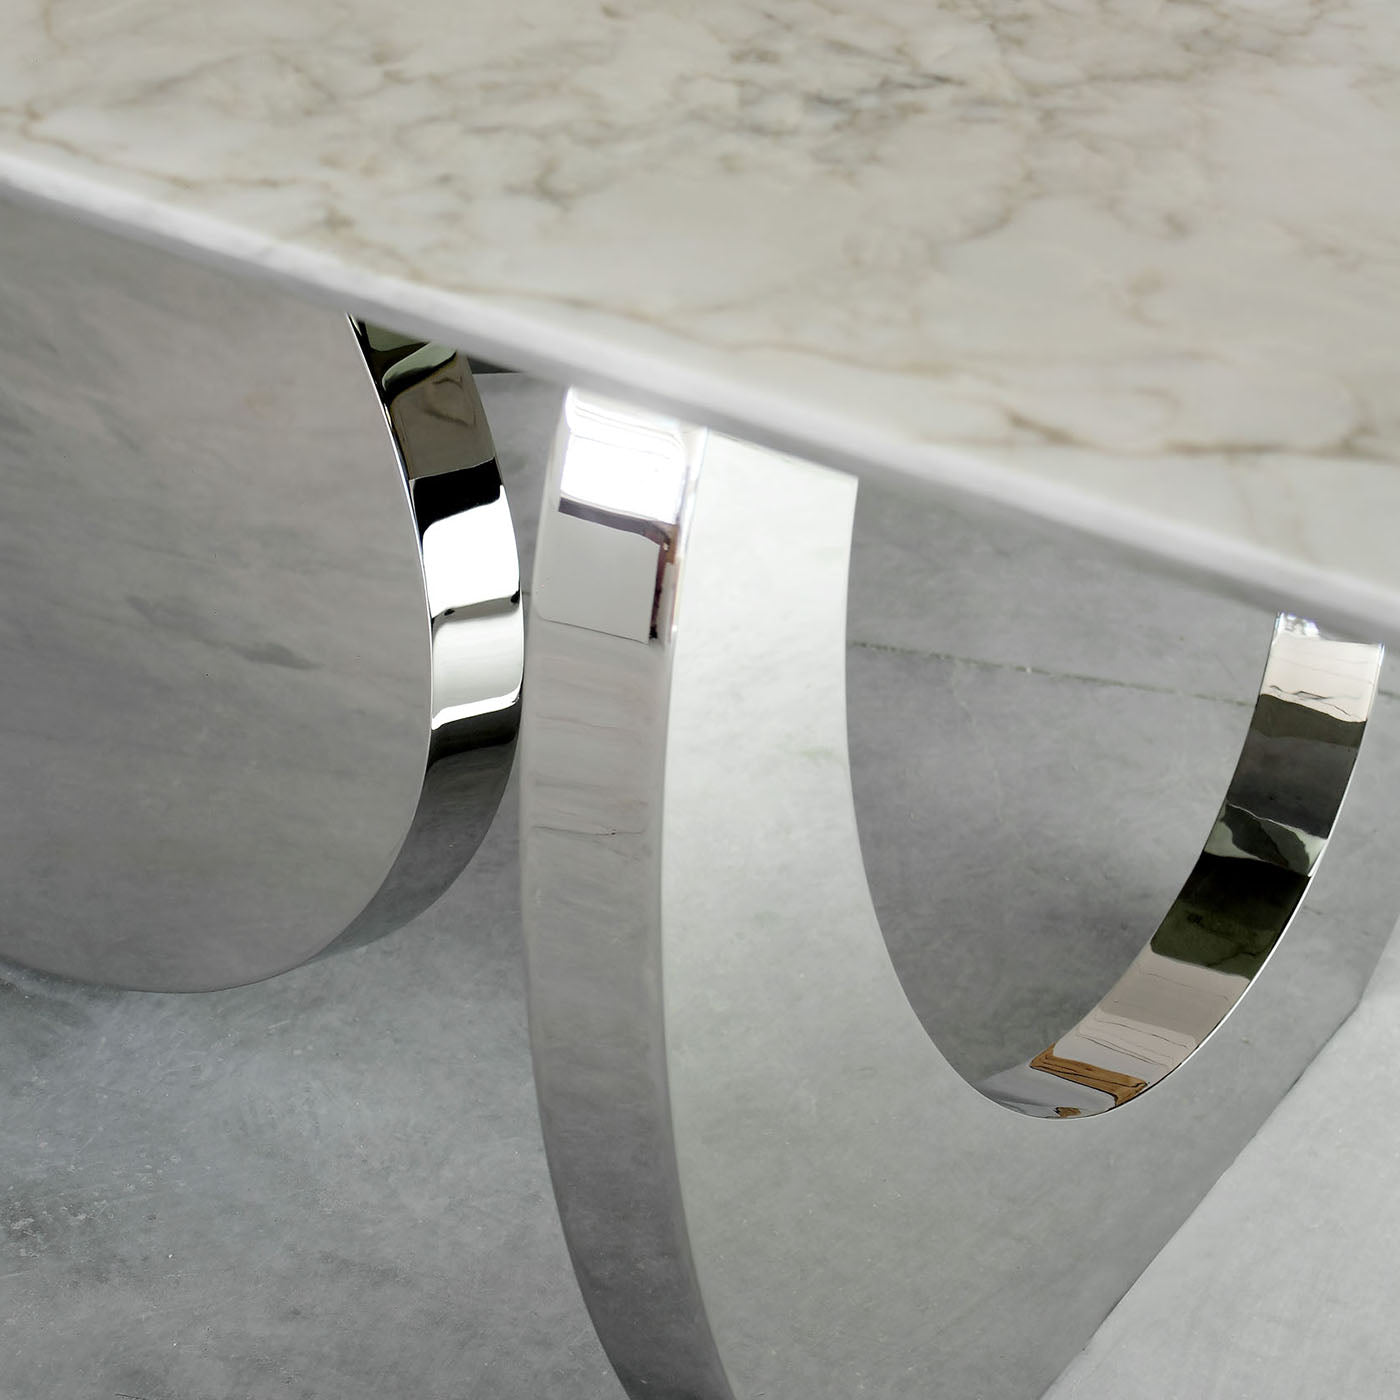 Bangles Stone Dining Table - Alternative view 1